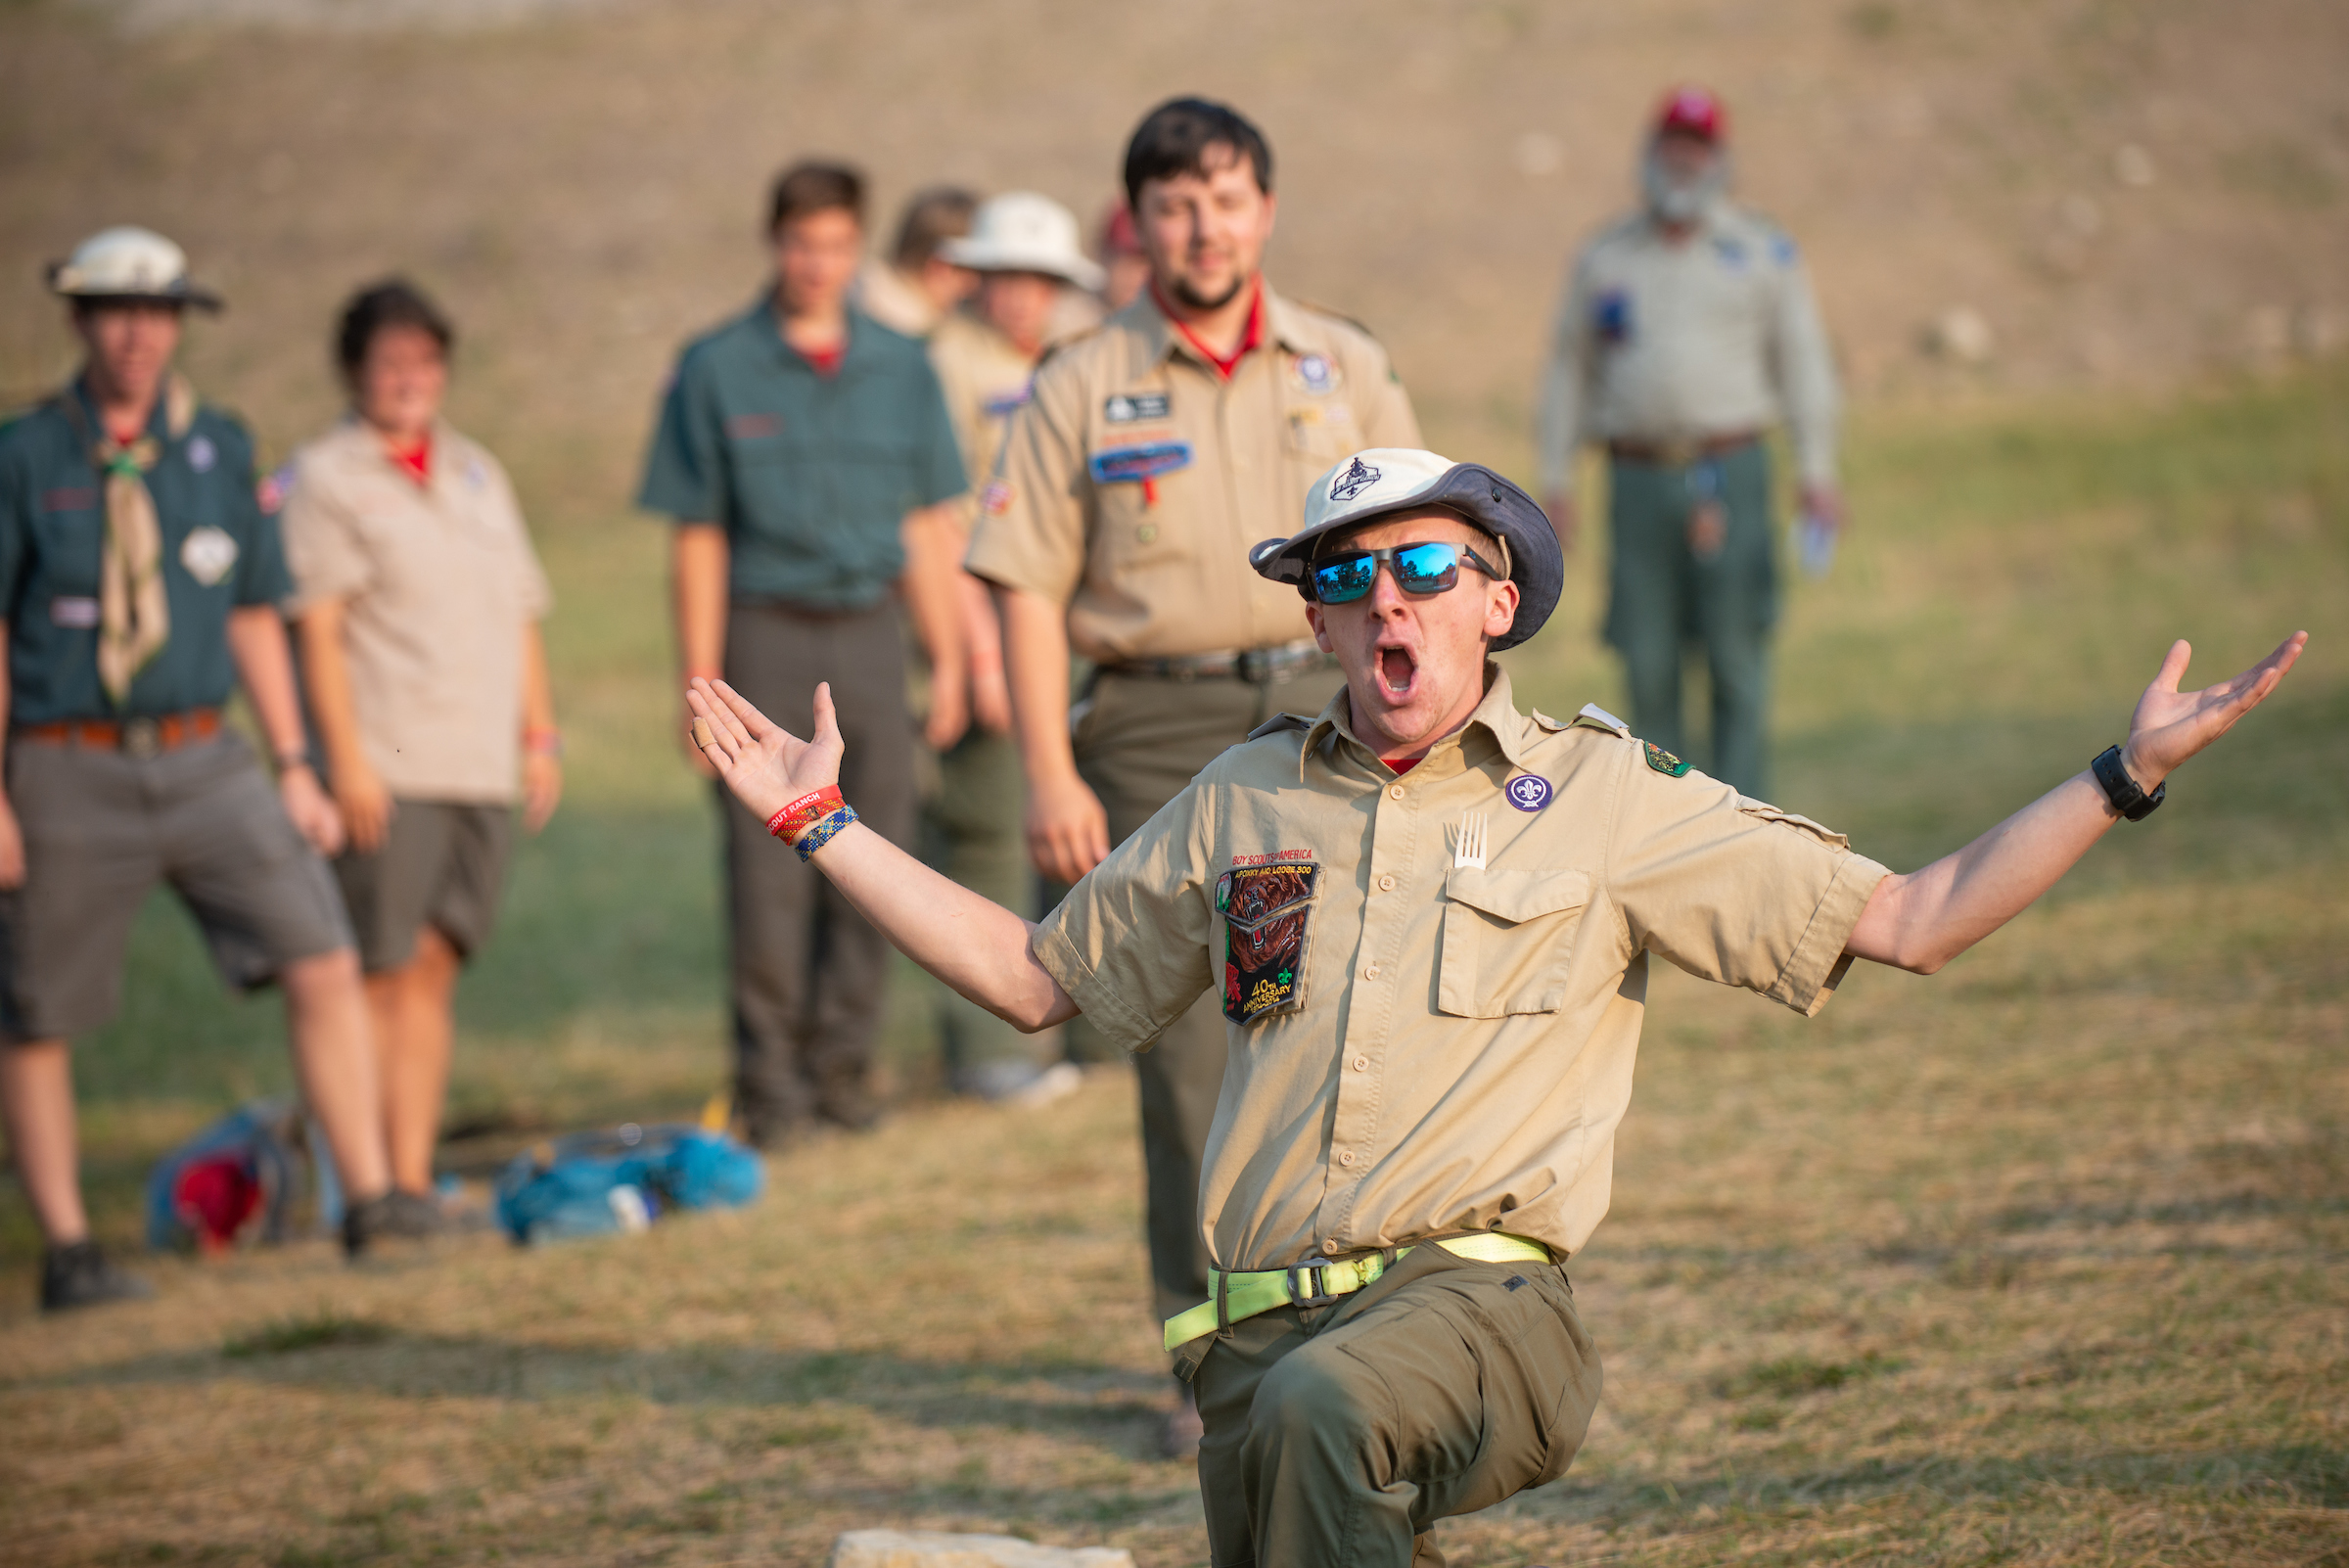 Boy Scouts camp counselor speaks enthusiastically to a group at summer camp